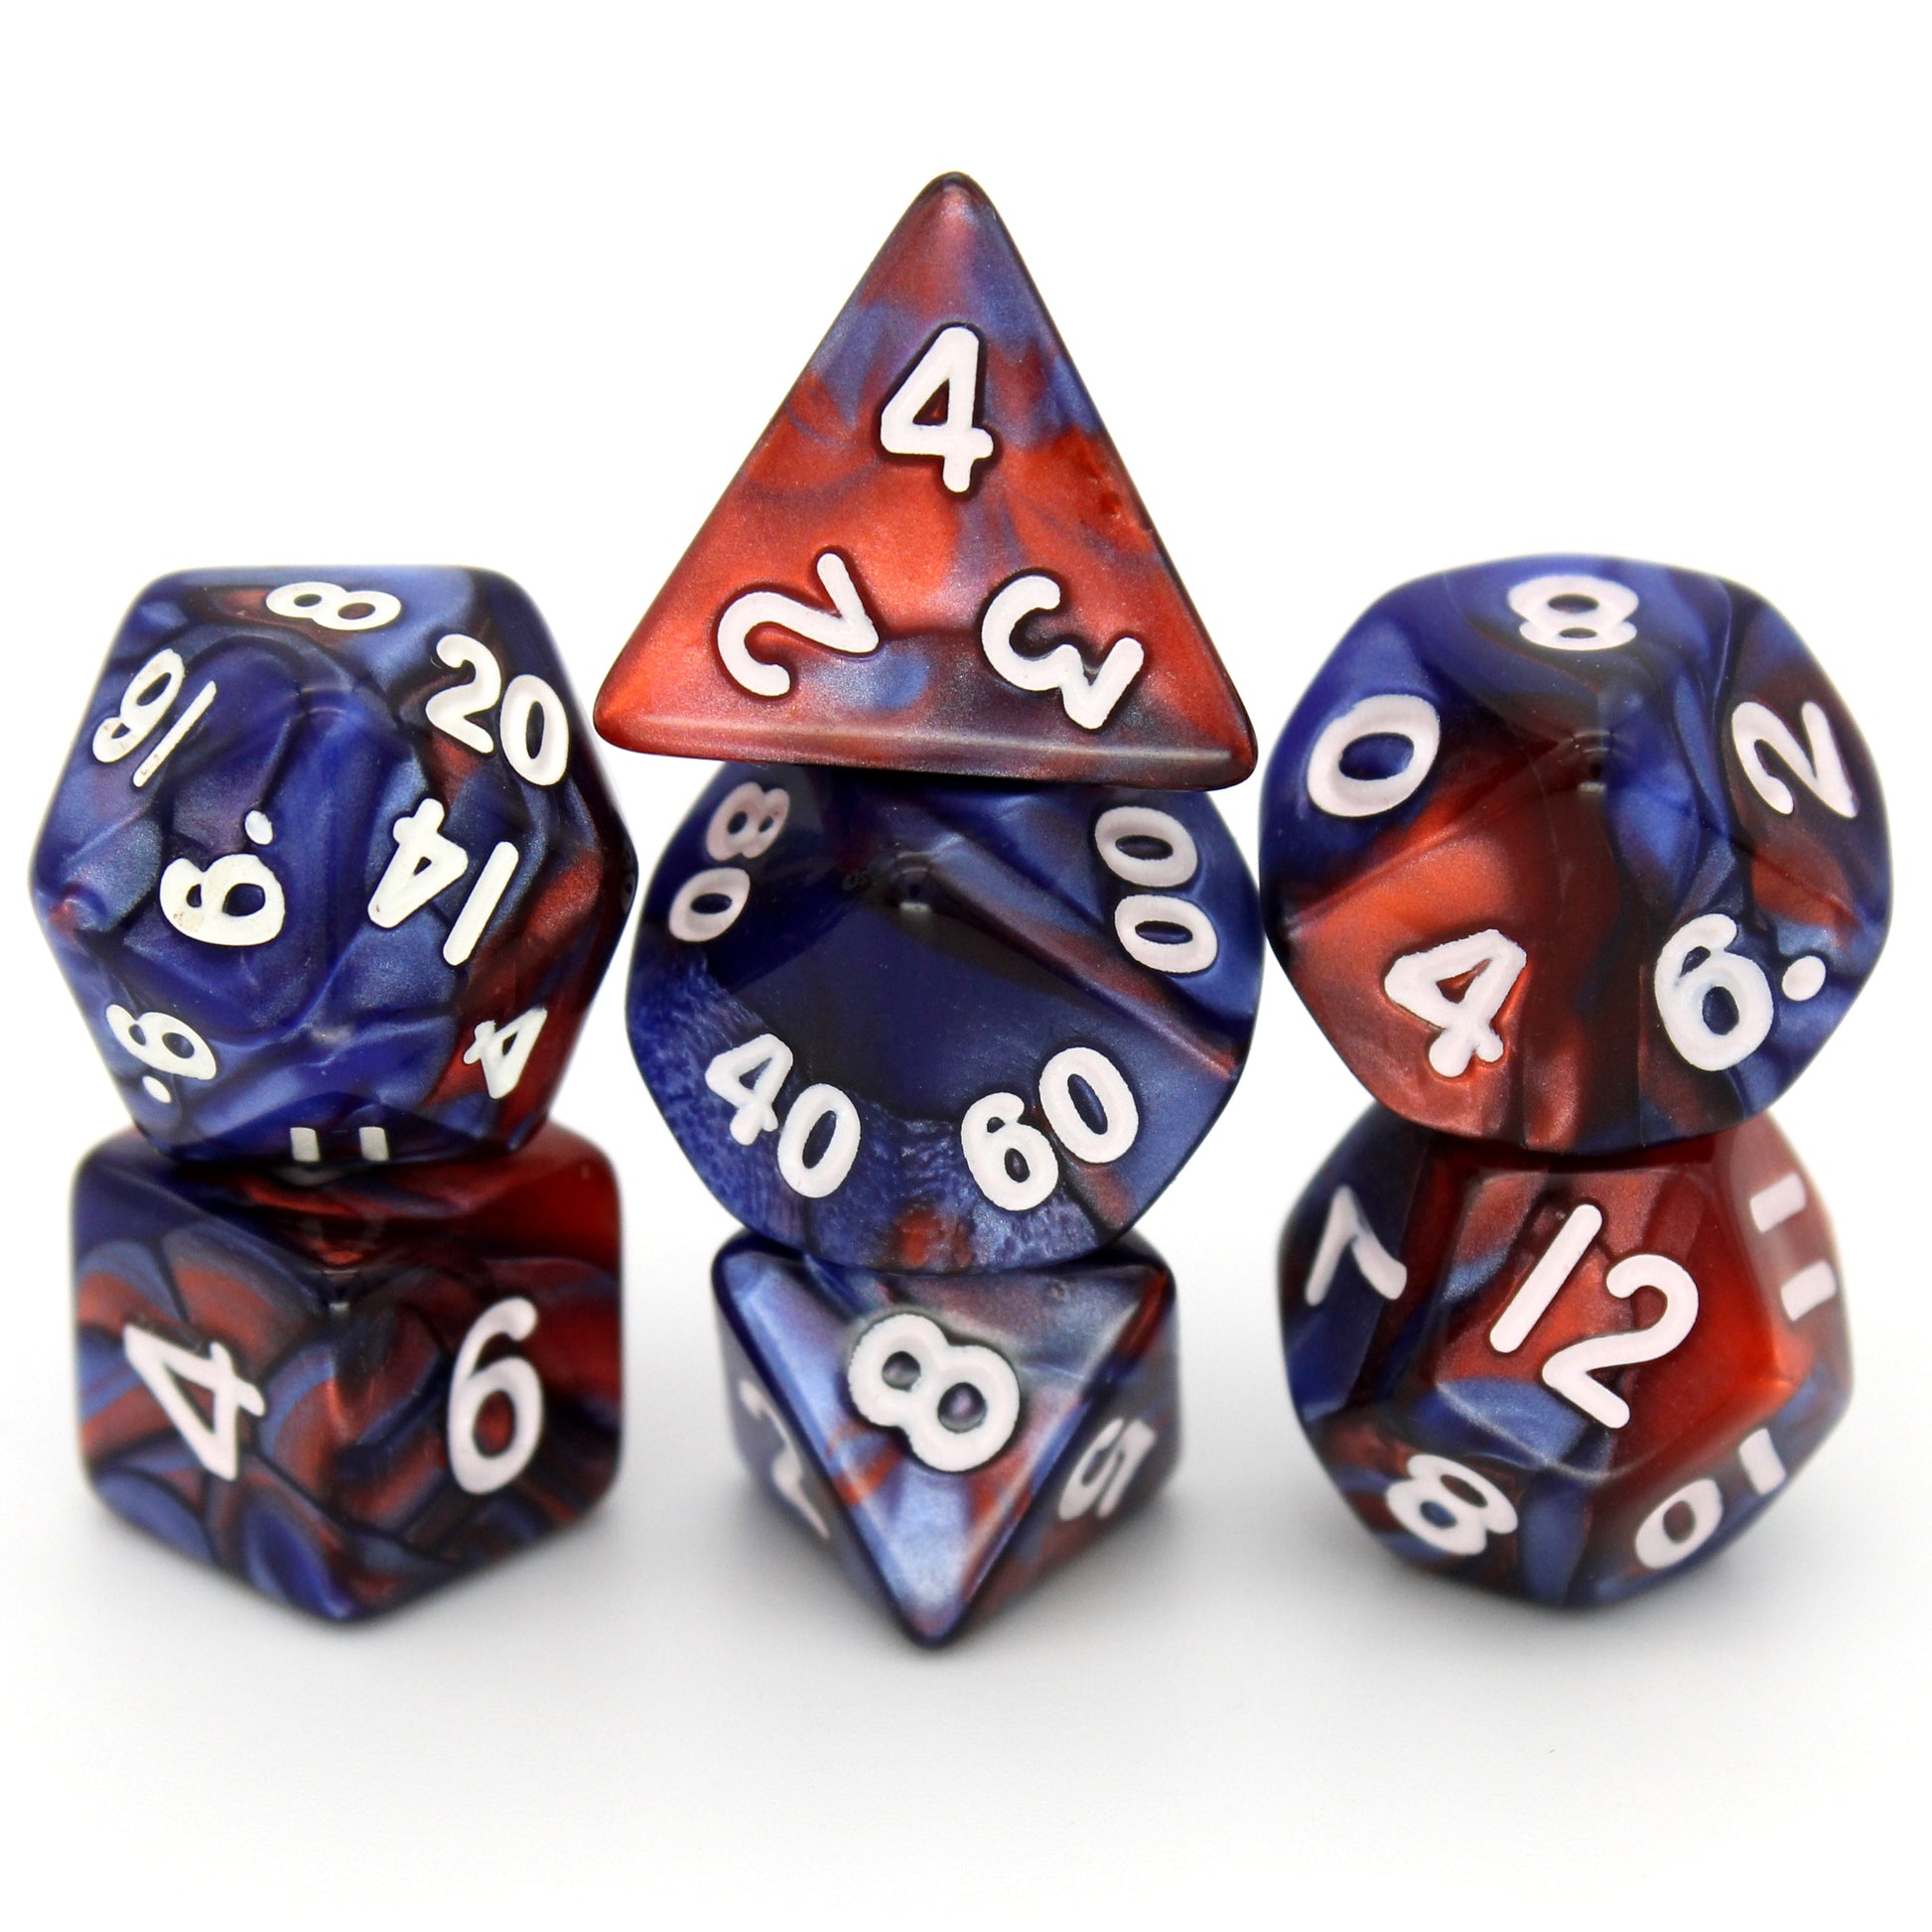 D'stracting is a 7-piece 13mm resin dice set with swirls of shimmery, pearlescent red and blue, with white ink. It belongs to our tiny but mighty Wee Lads collection.